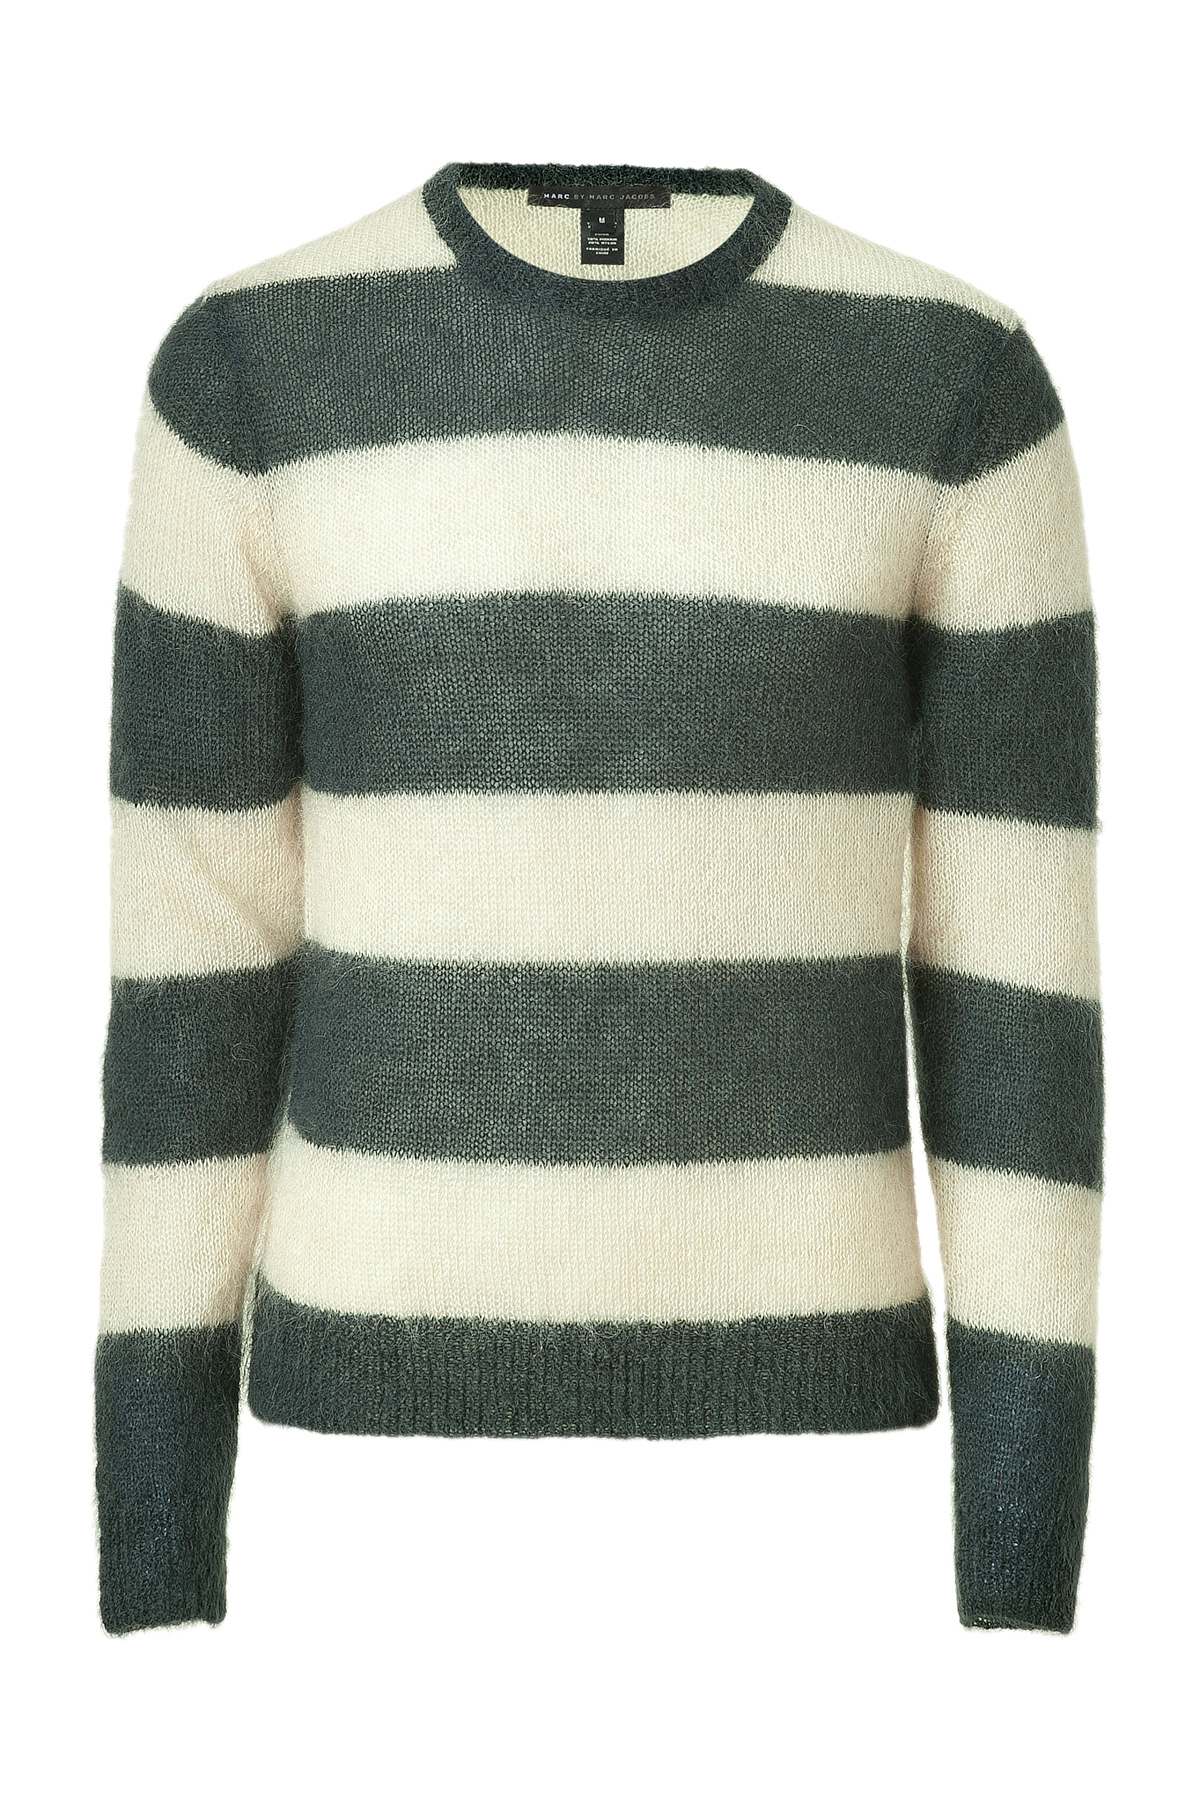 Lyst - Marc By Marc Jacobs Striped Kid Knittop in Natural for Men